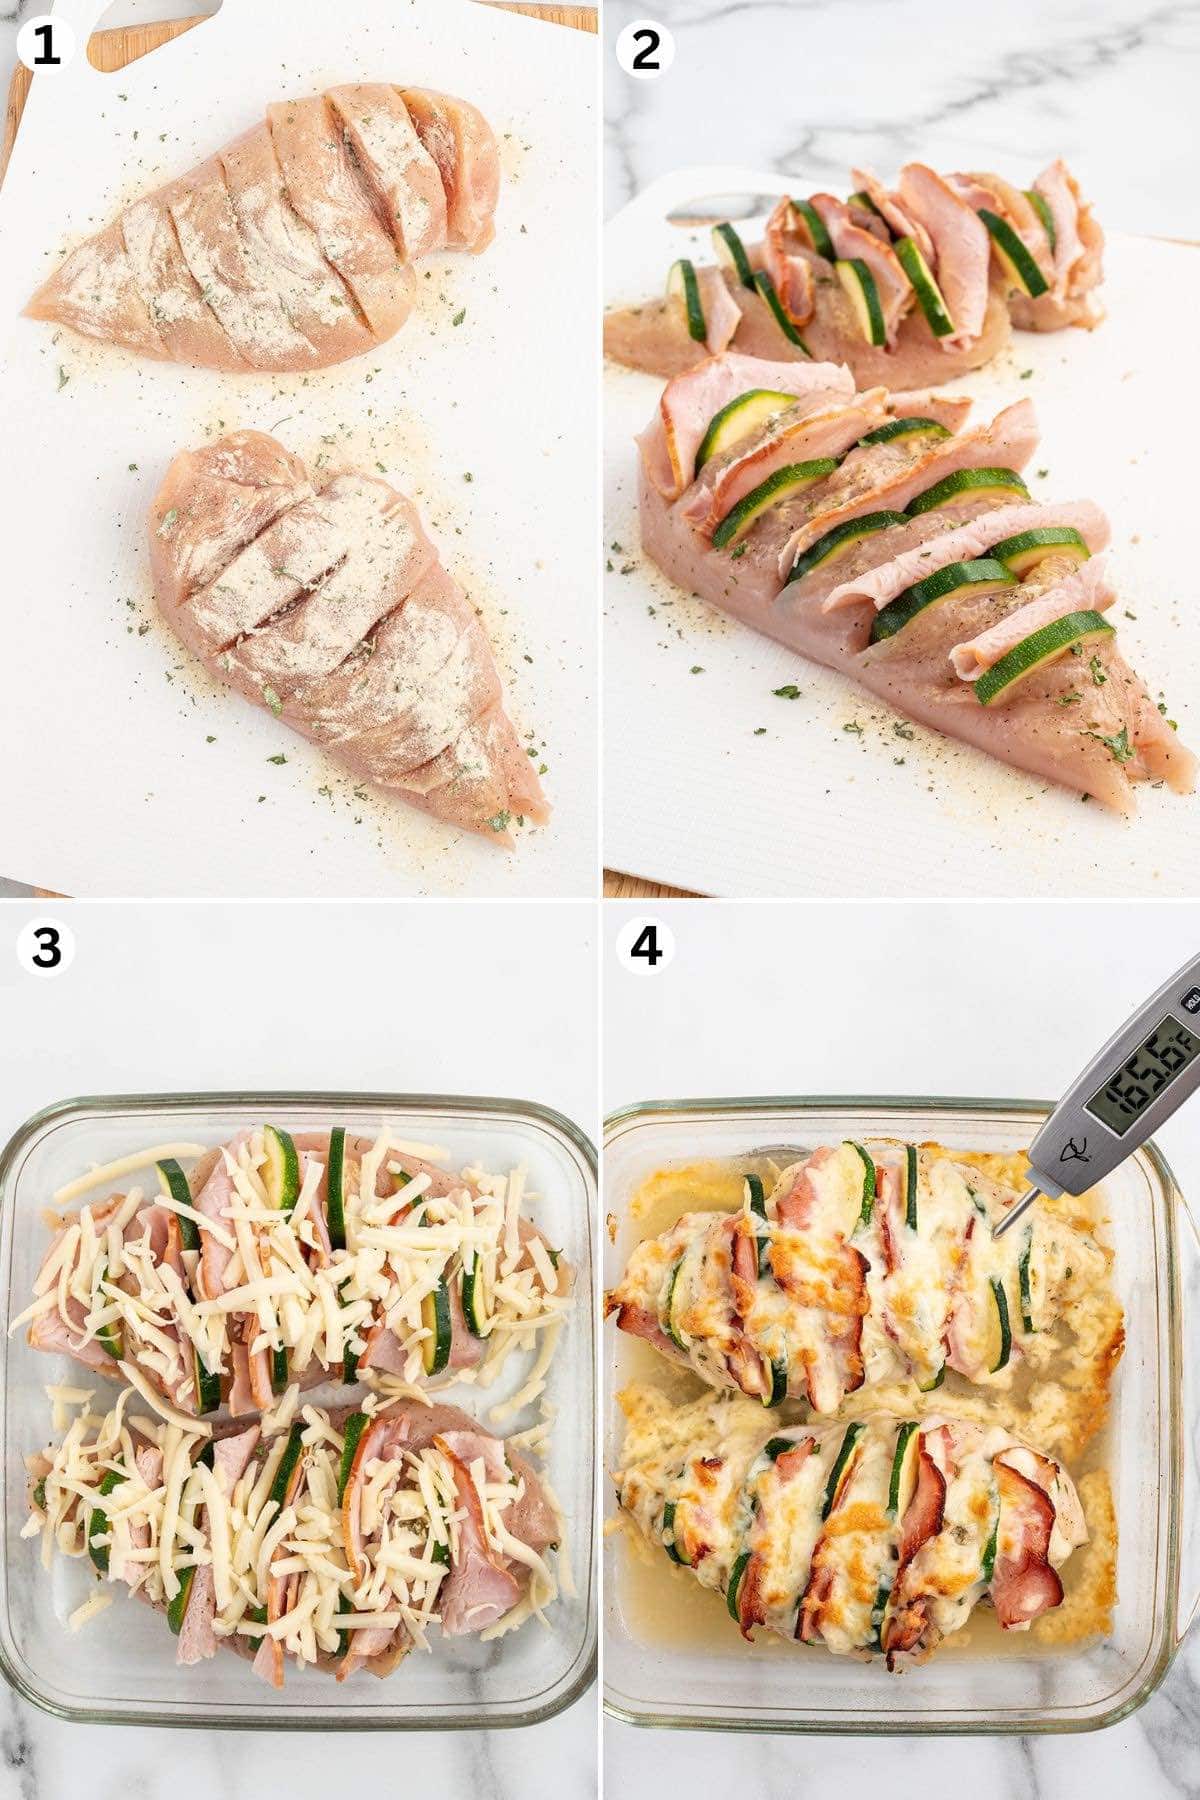 slice the chicken and sprinkle with seasoning. fill with vegetable pieces. sprinkle with shredded cheese and bake. 